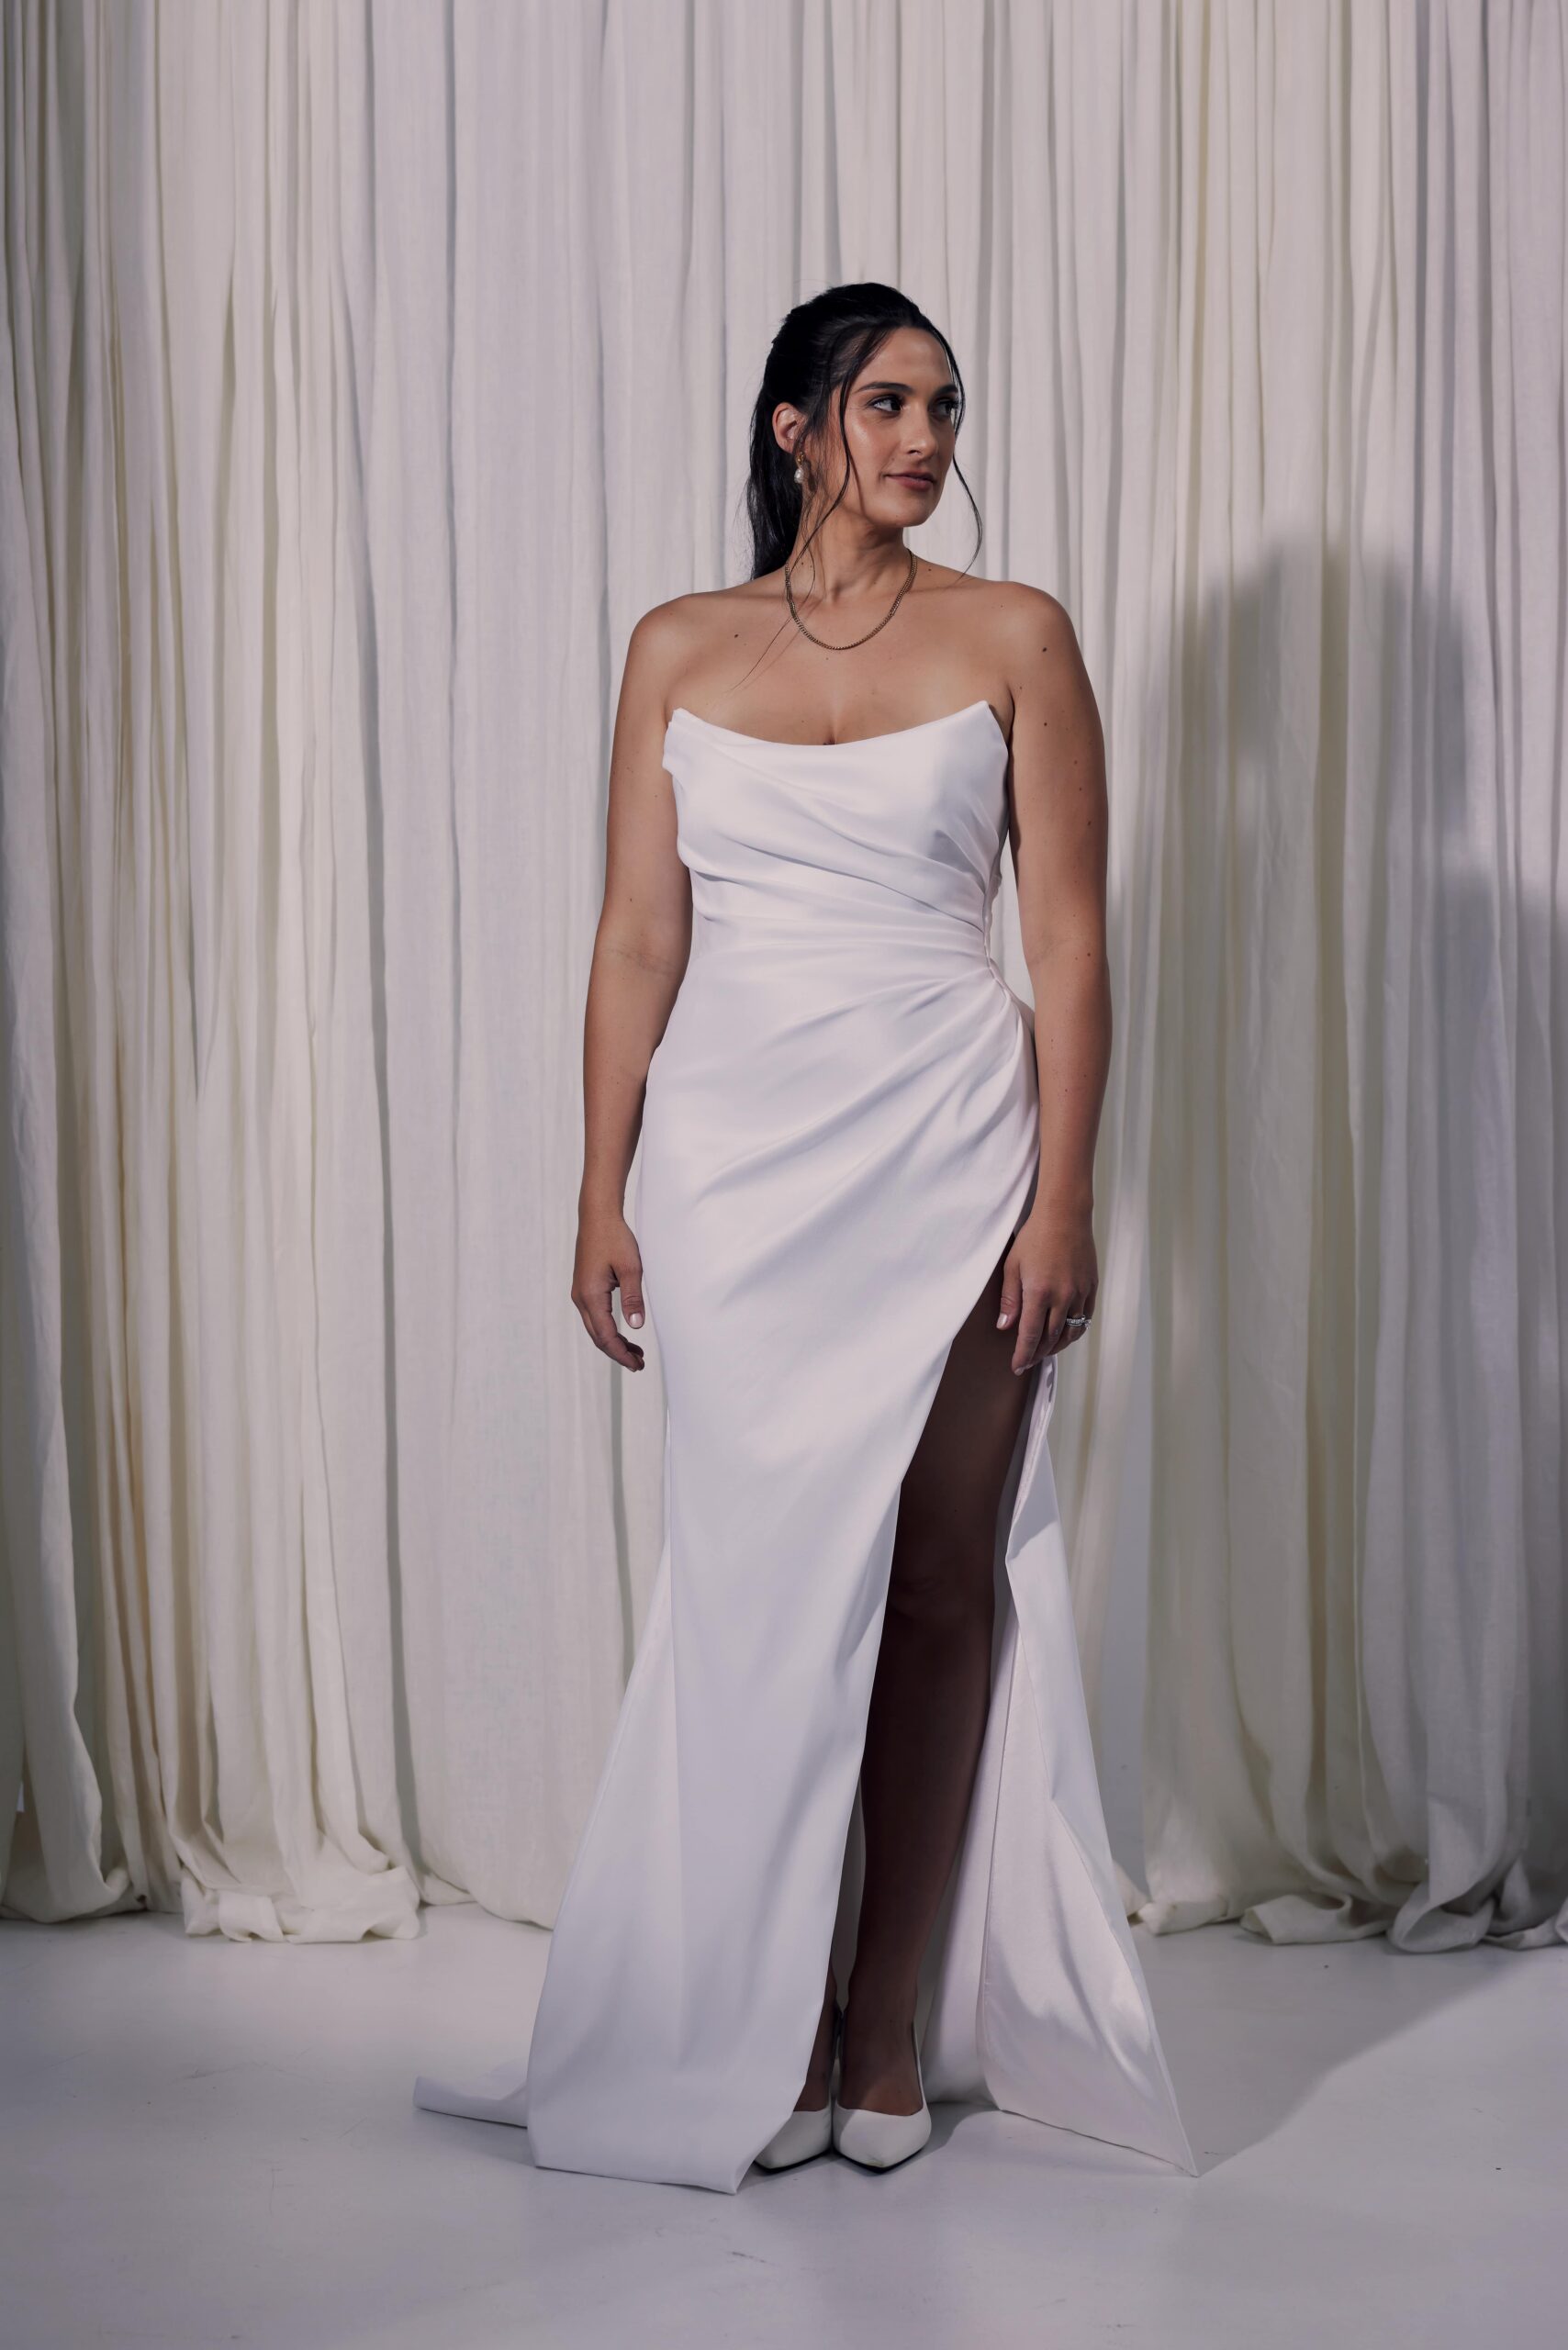 The Carolina gown - a stretch twill gown with draping, scoop neckline and a side split.